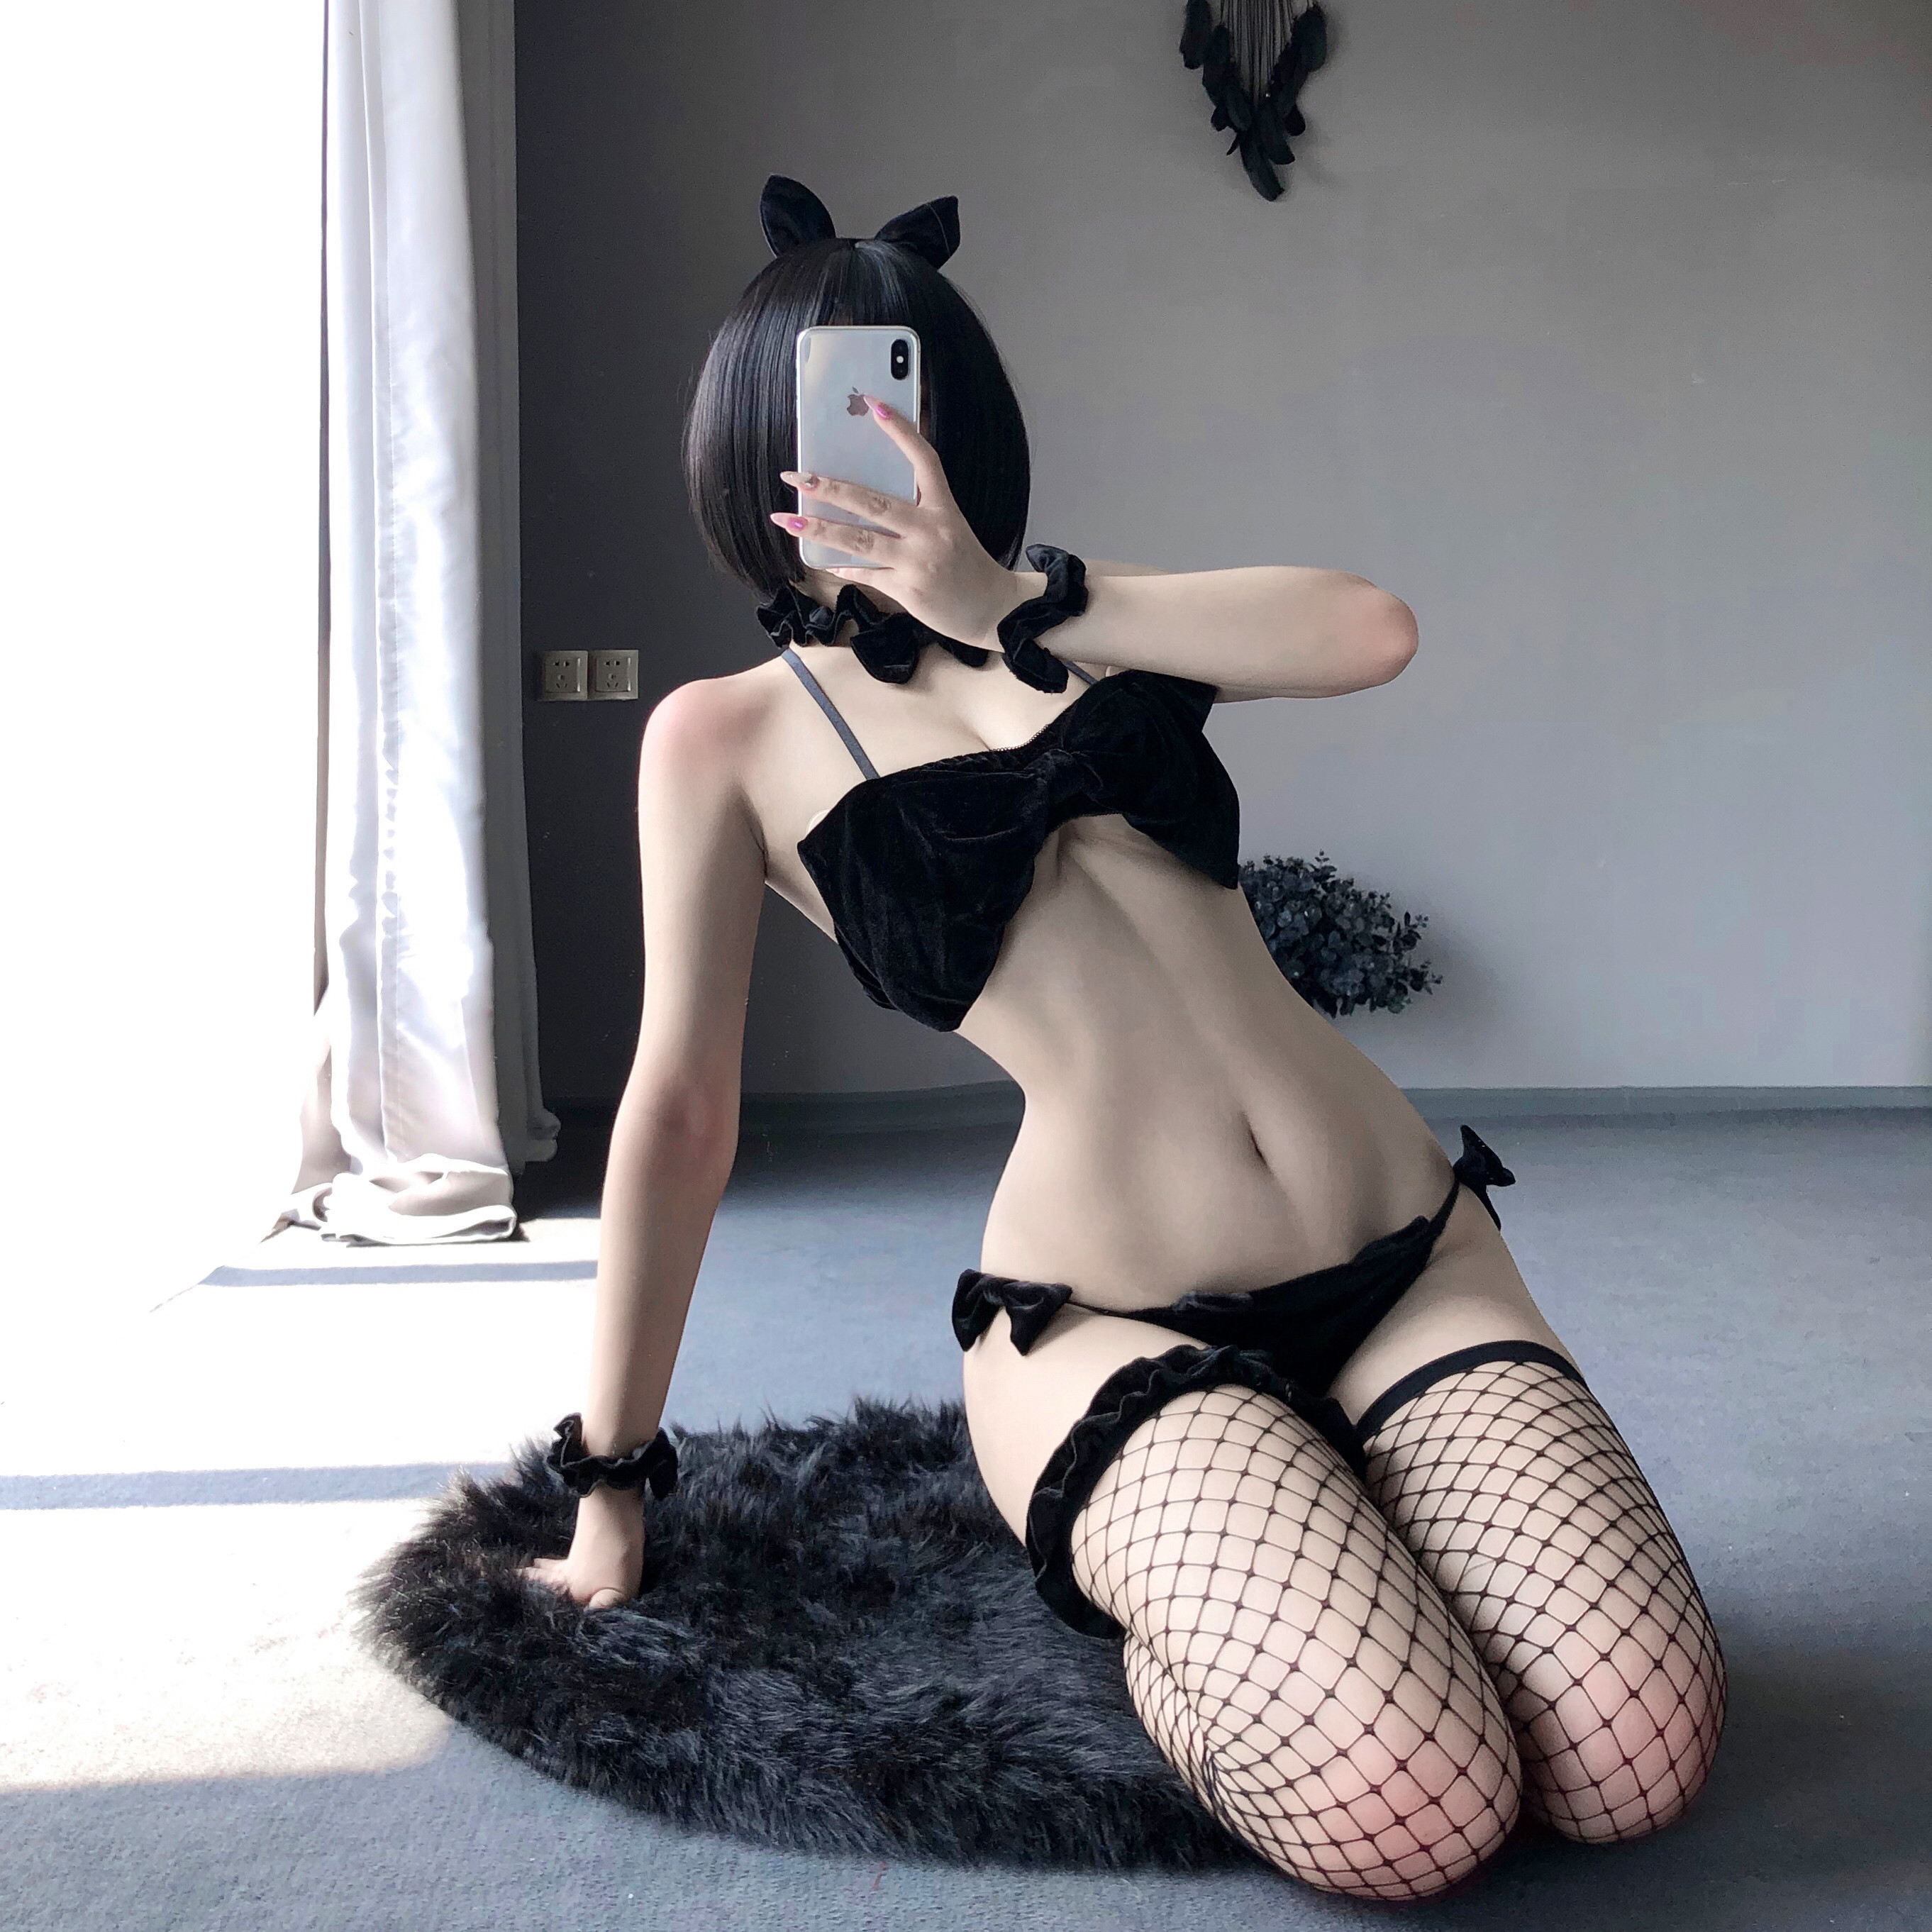 New Year Christmas Women's Sexy costume flannel Bunny girl suit cosplay Erotic lingerie Role play costume for Sex adult suit